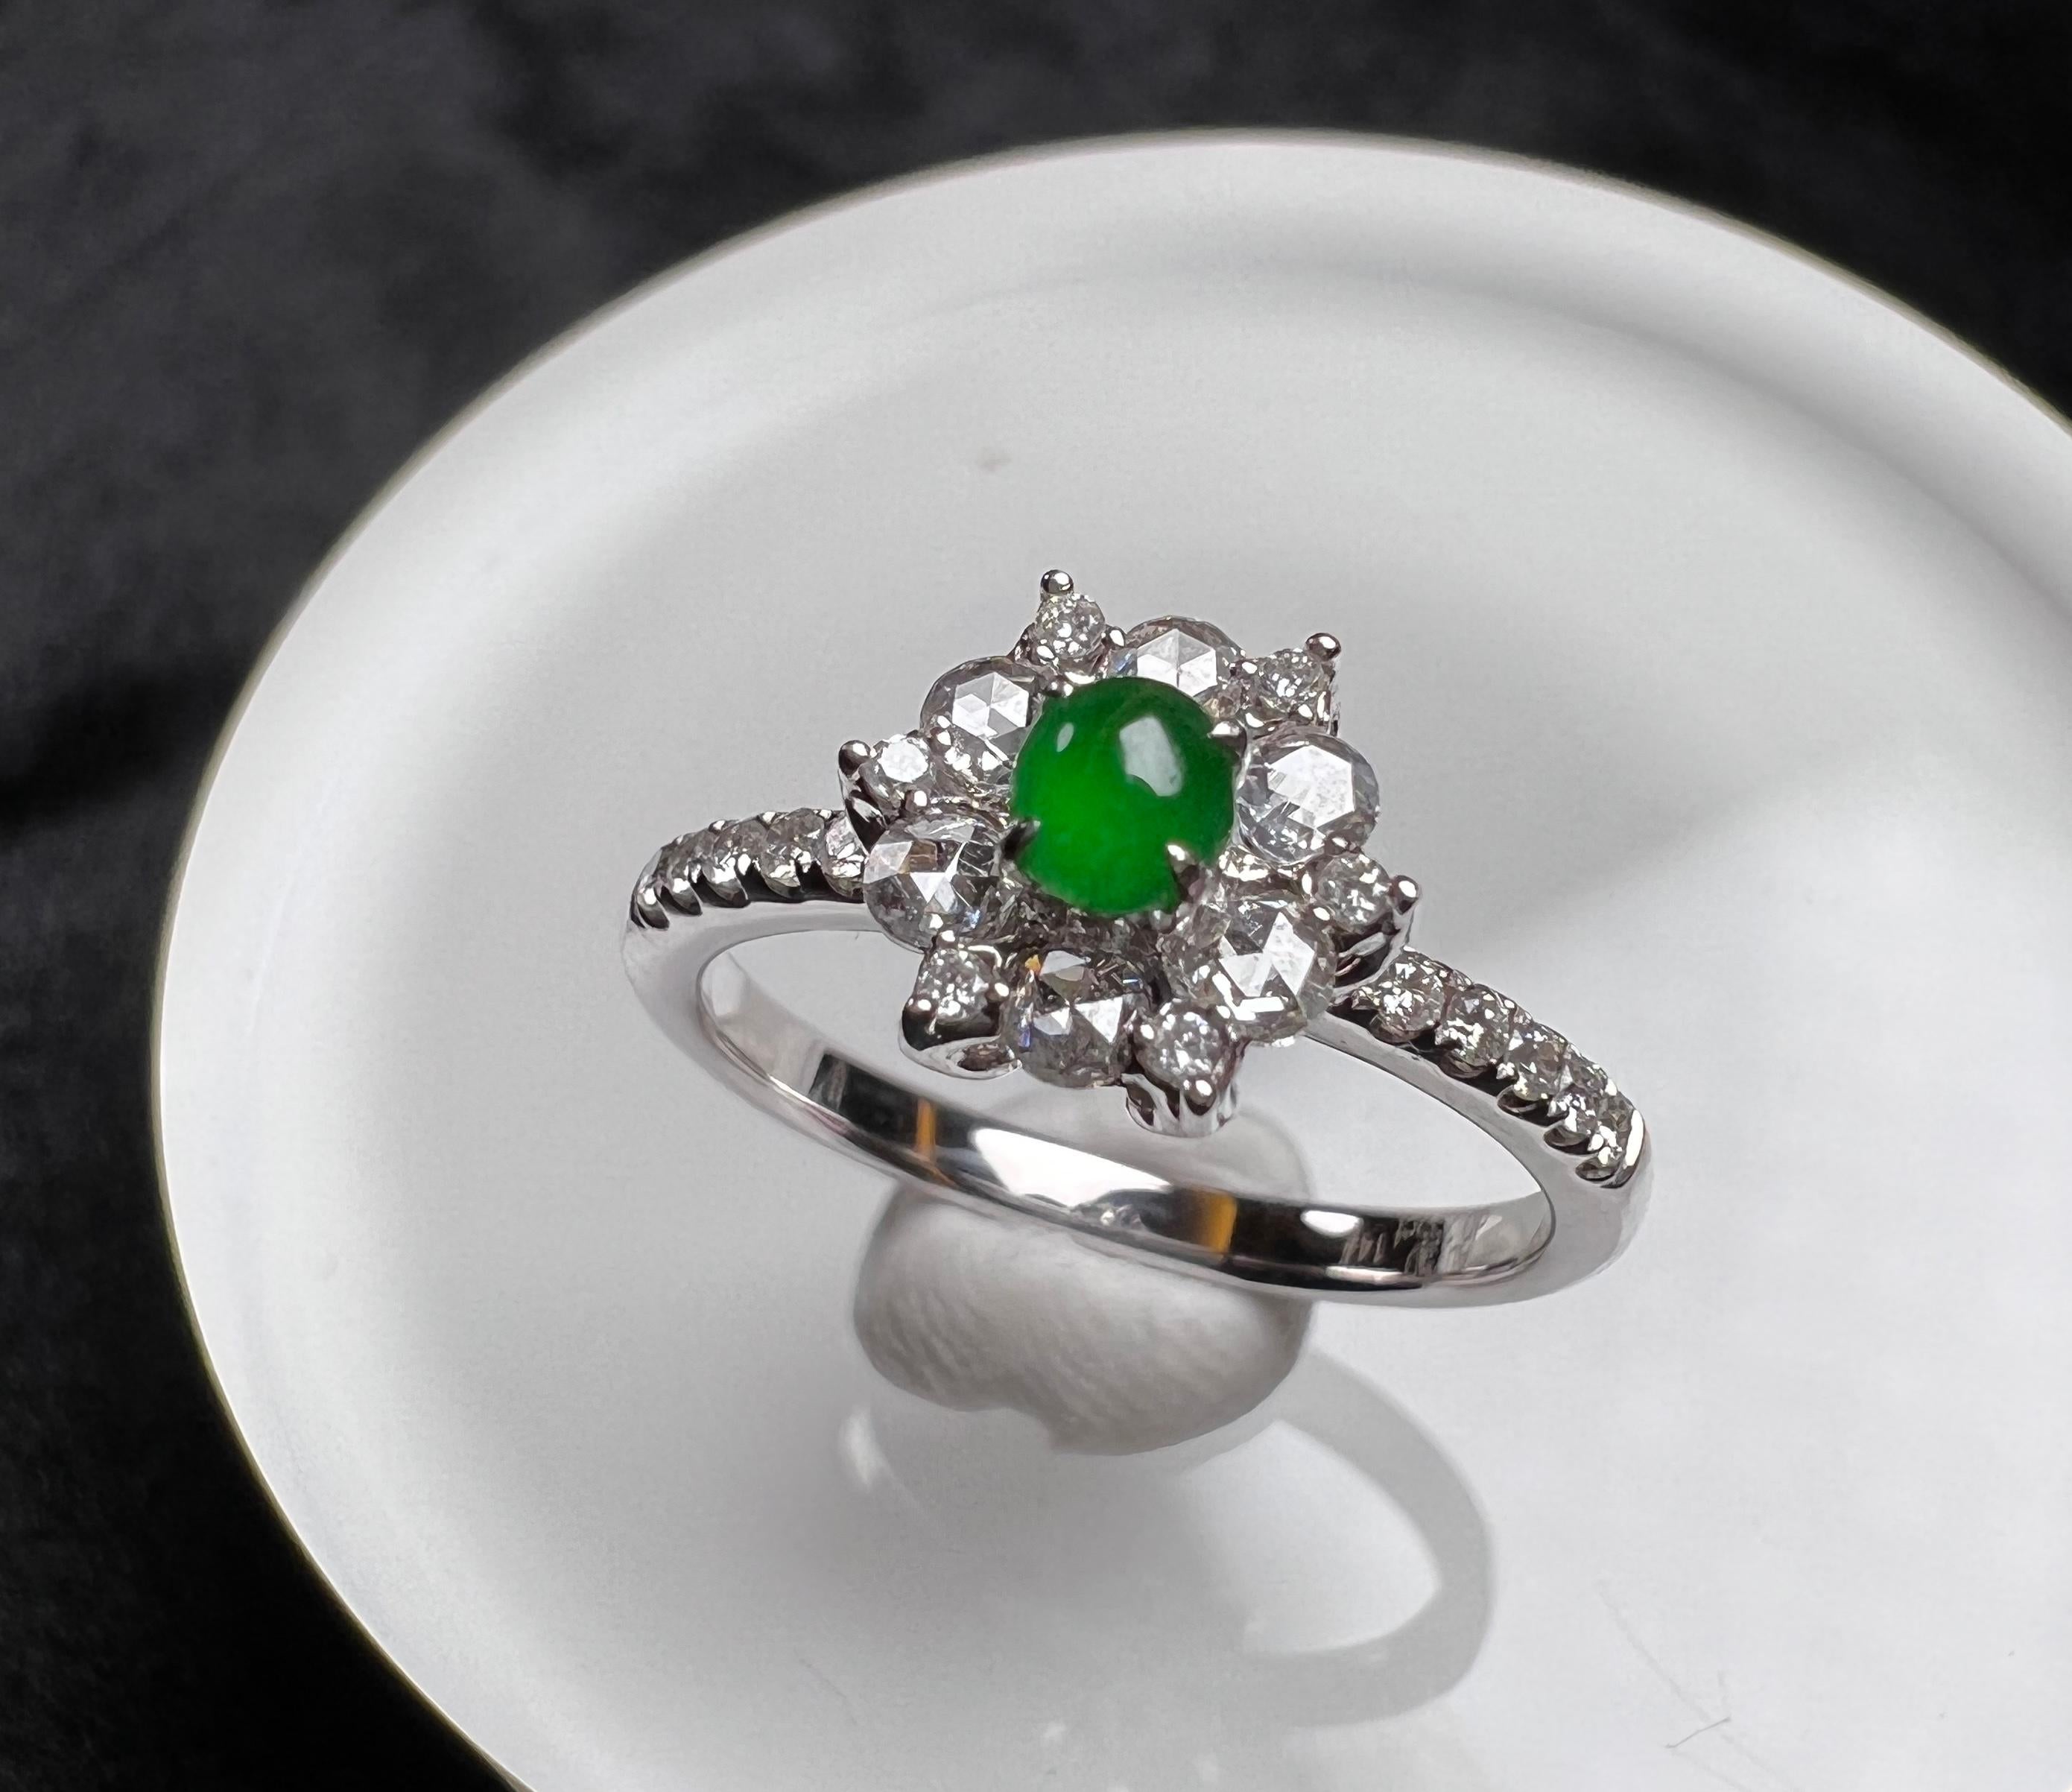 18K White Gold Green Jadeite Diamond Flower Cluster Ring, Engagement Ring

Size: N (UK) / 7 (US)
Circumference (approx.): 54mm 
Diameter (approx.): 17.2mm 

Total weight (approx.): 2.7g
Centre setting measurement (approx.): 7.7*8.7mm 
Main stone